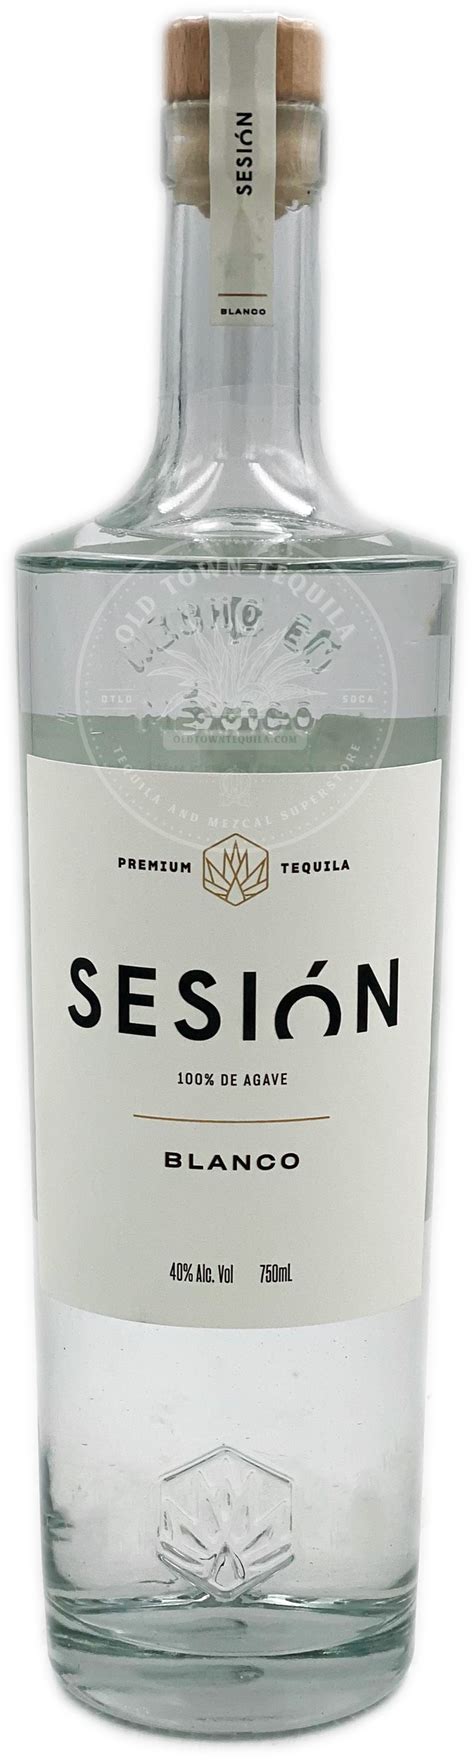 Sesion Tequila Blanco 750ml Old Town Tequila